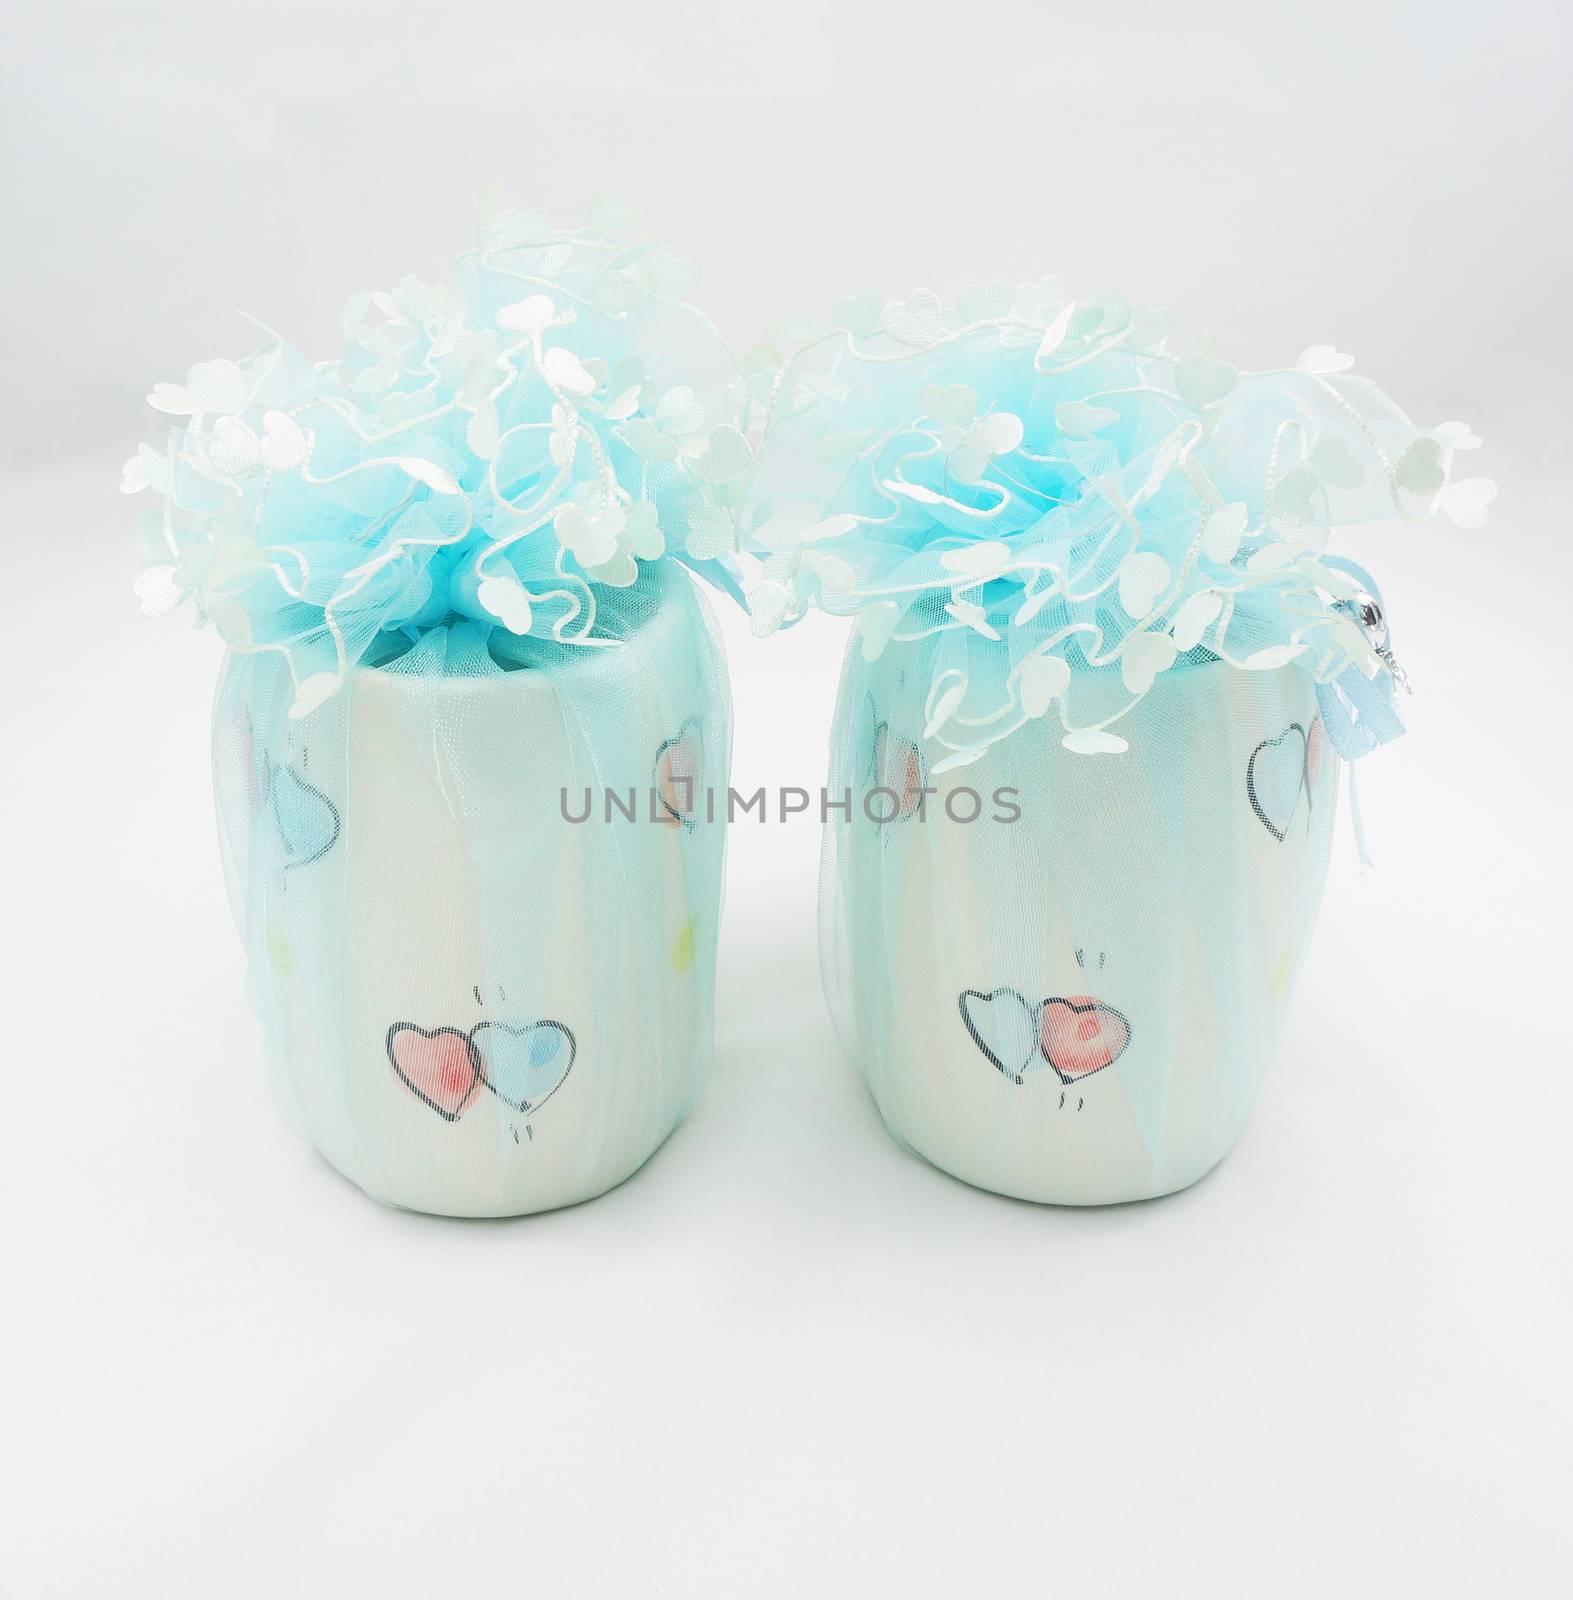 Souvenirs wedding day is a cup with a heart pattern, wrapped with blue mesh upper designed to tie into a heart-shaped mesh.                              